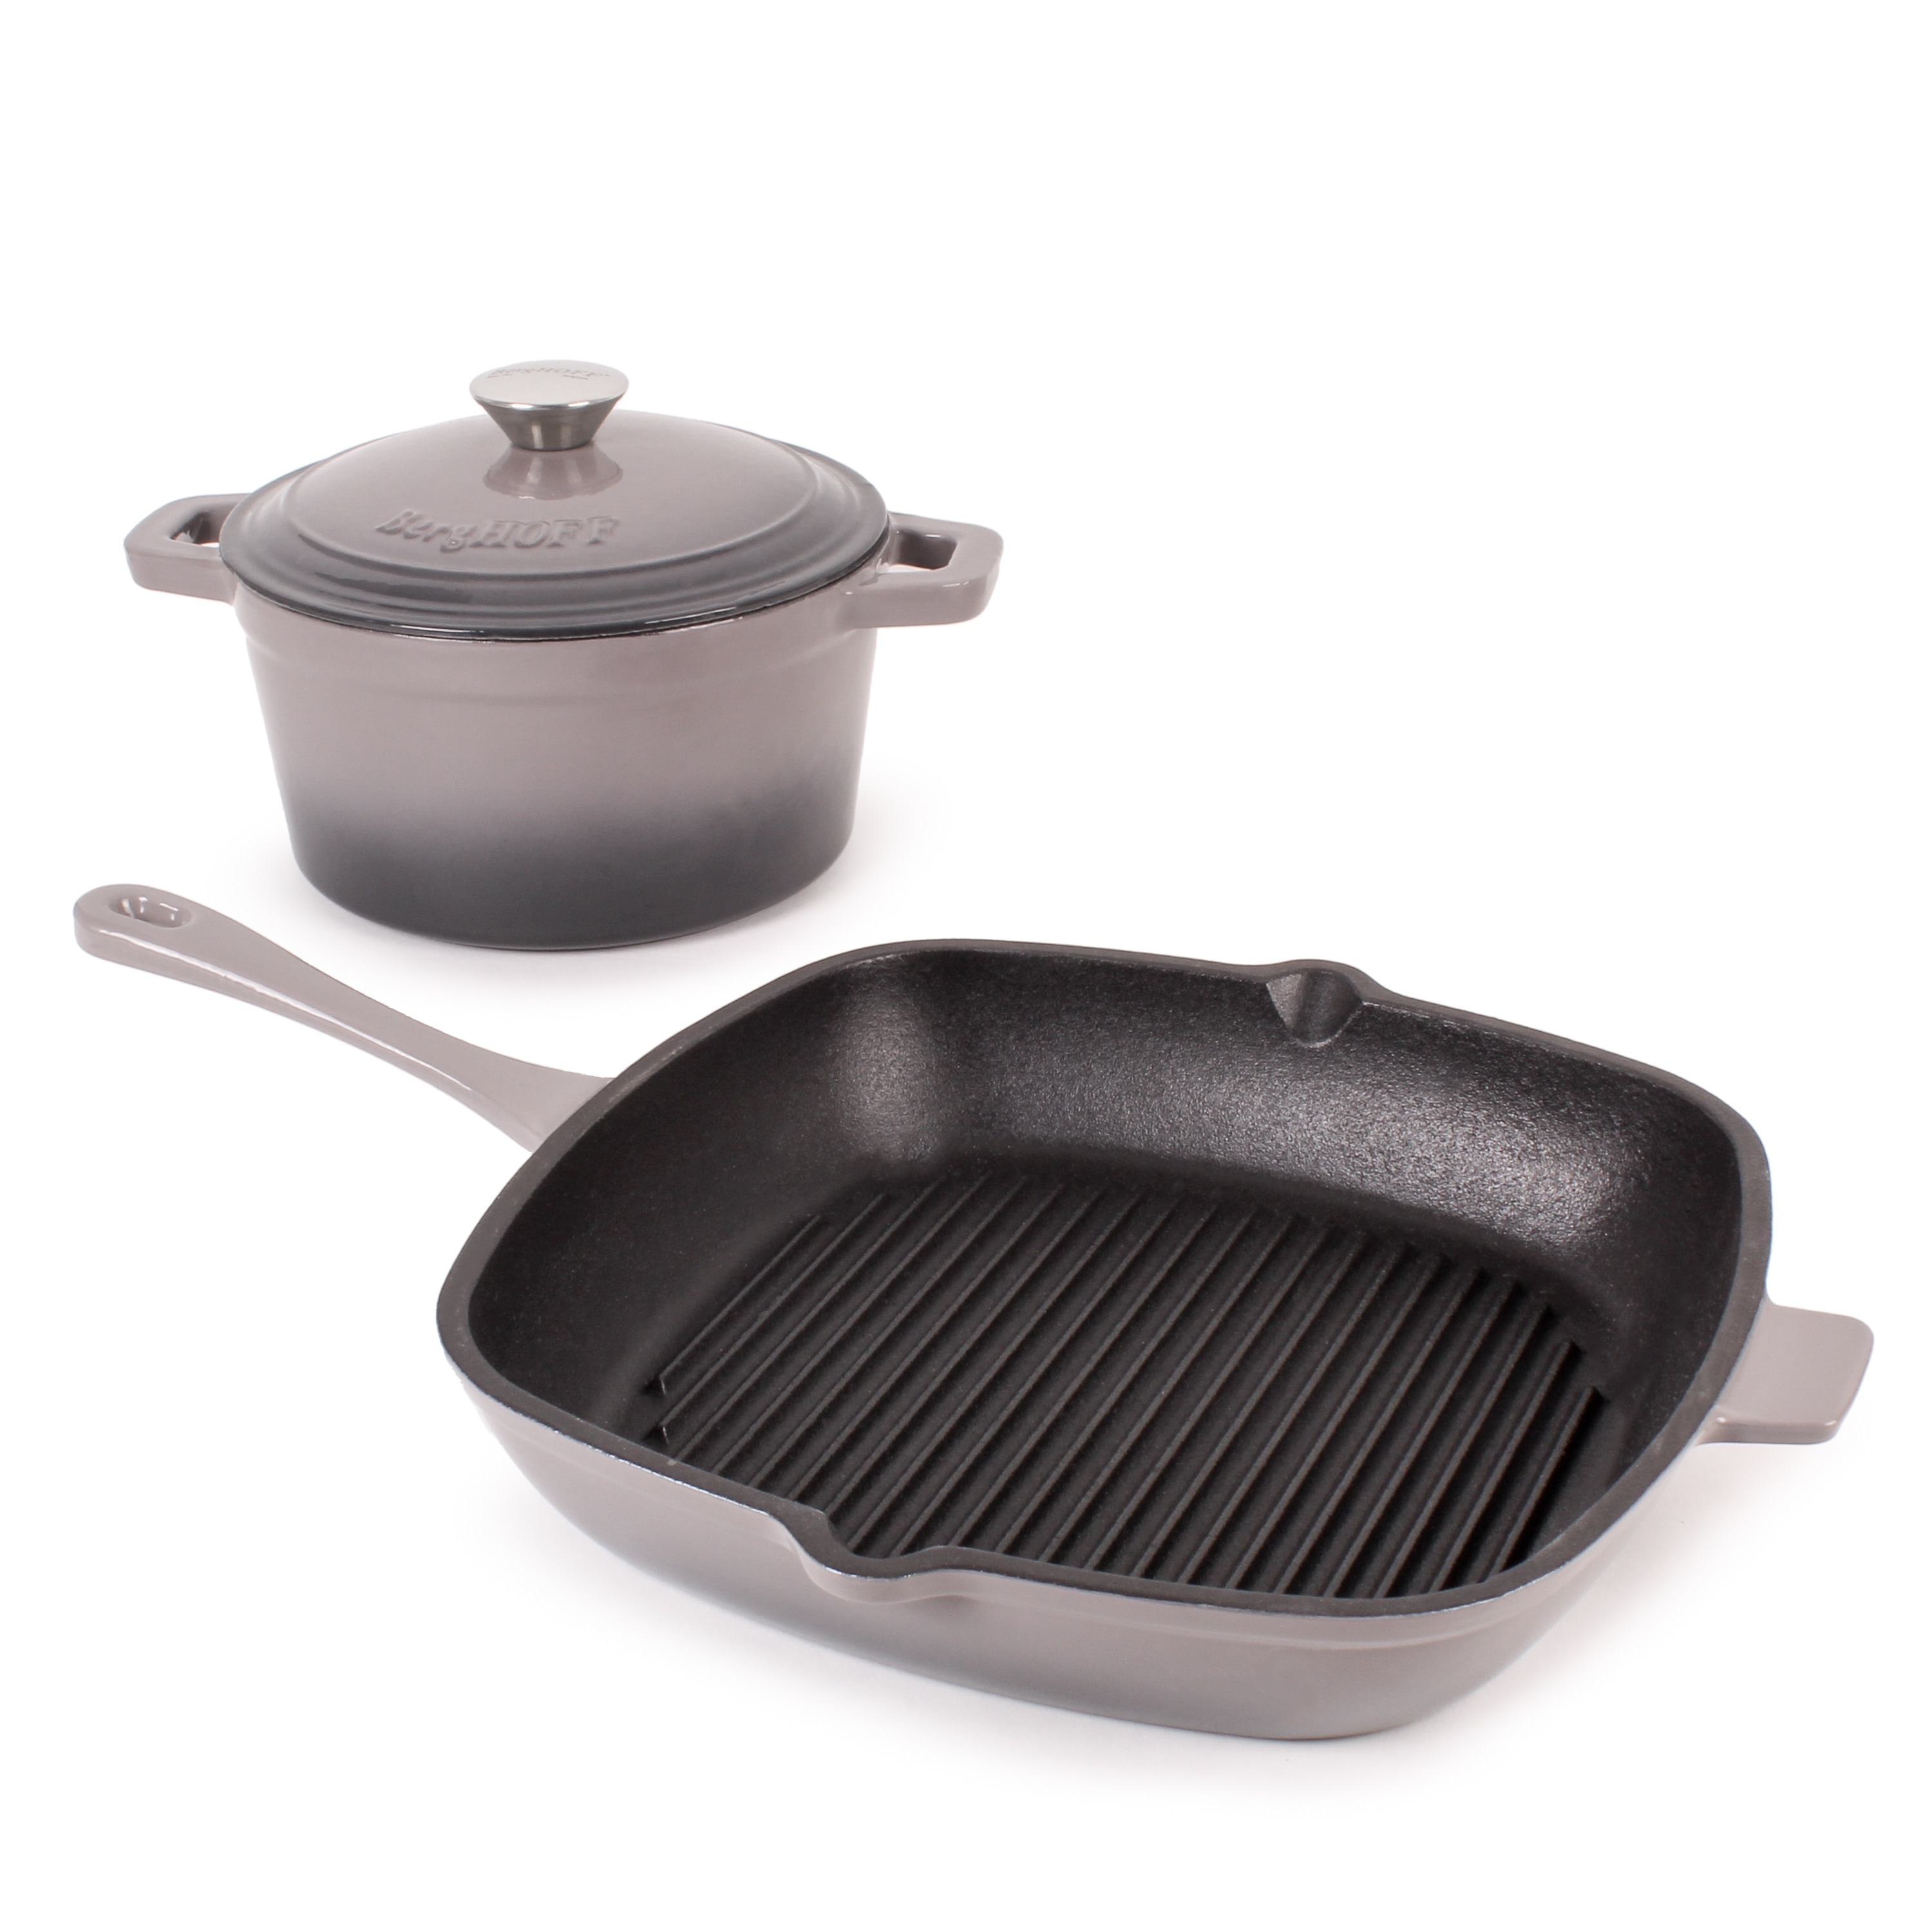 https://ak1.ostkcdn.com/images/products/is/images/direct/afb931c719d8d3e125ab7d22c300078fdffef94c/Neo-3pc-Cast-Iron-Set-3qt-Covered-Dutch-Oven-%26-11%22-Grill-Pan-Oyster.jpg